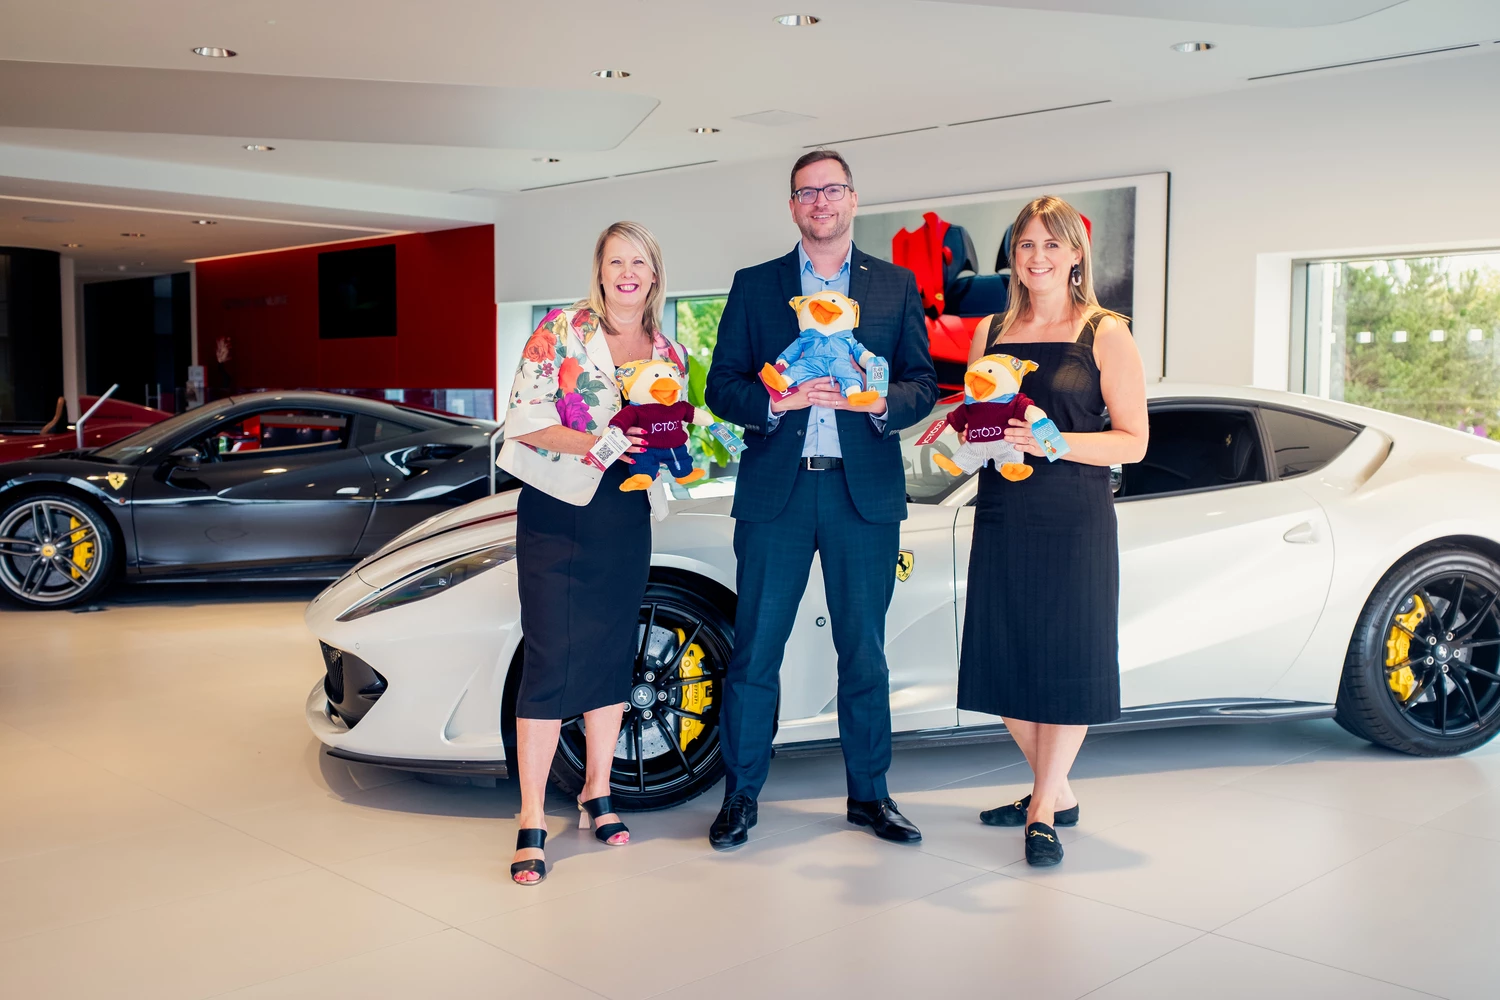 (L to R): Elaine Dunning, Give a Duck Fundraising Manager; Andy Bateman of JCT600; and Eve Corry, Give a Duck Development Manager, at JCT600’s Ferrari dealership in Leeds